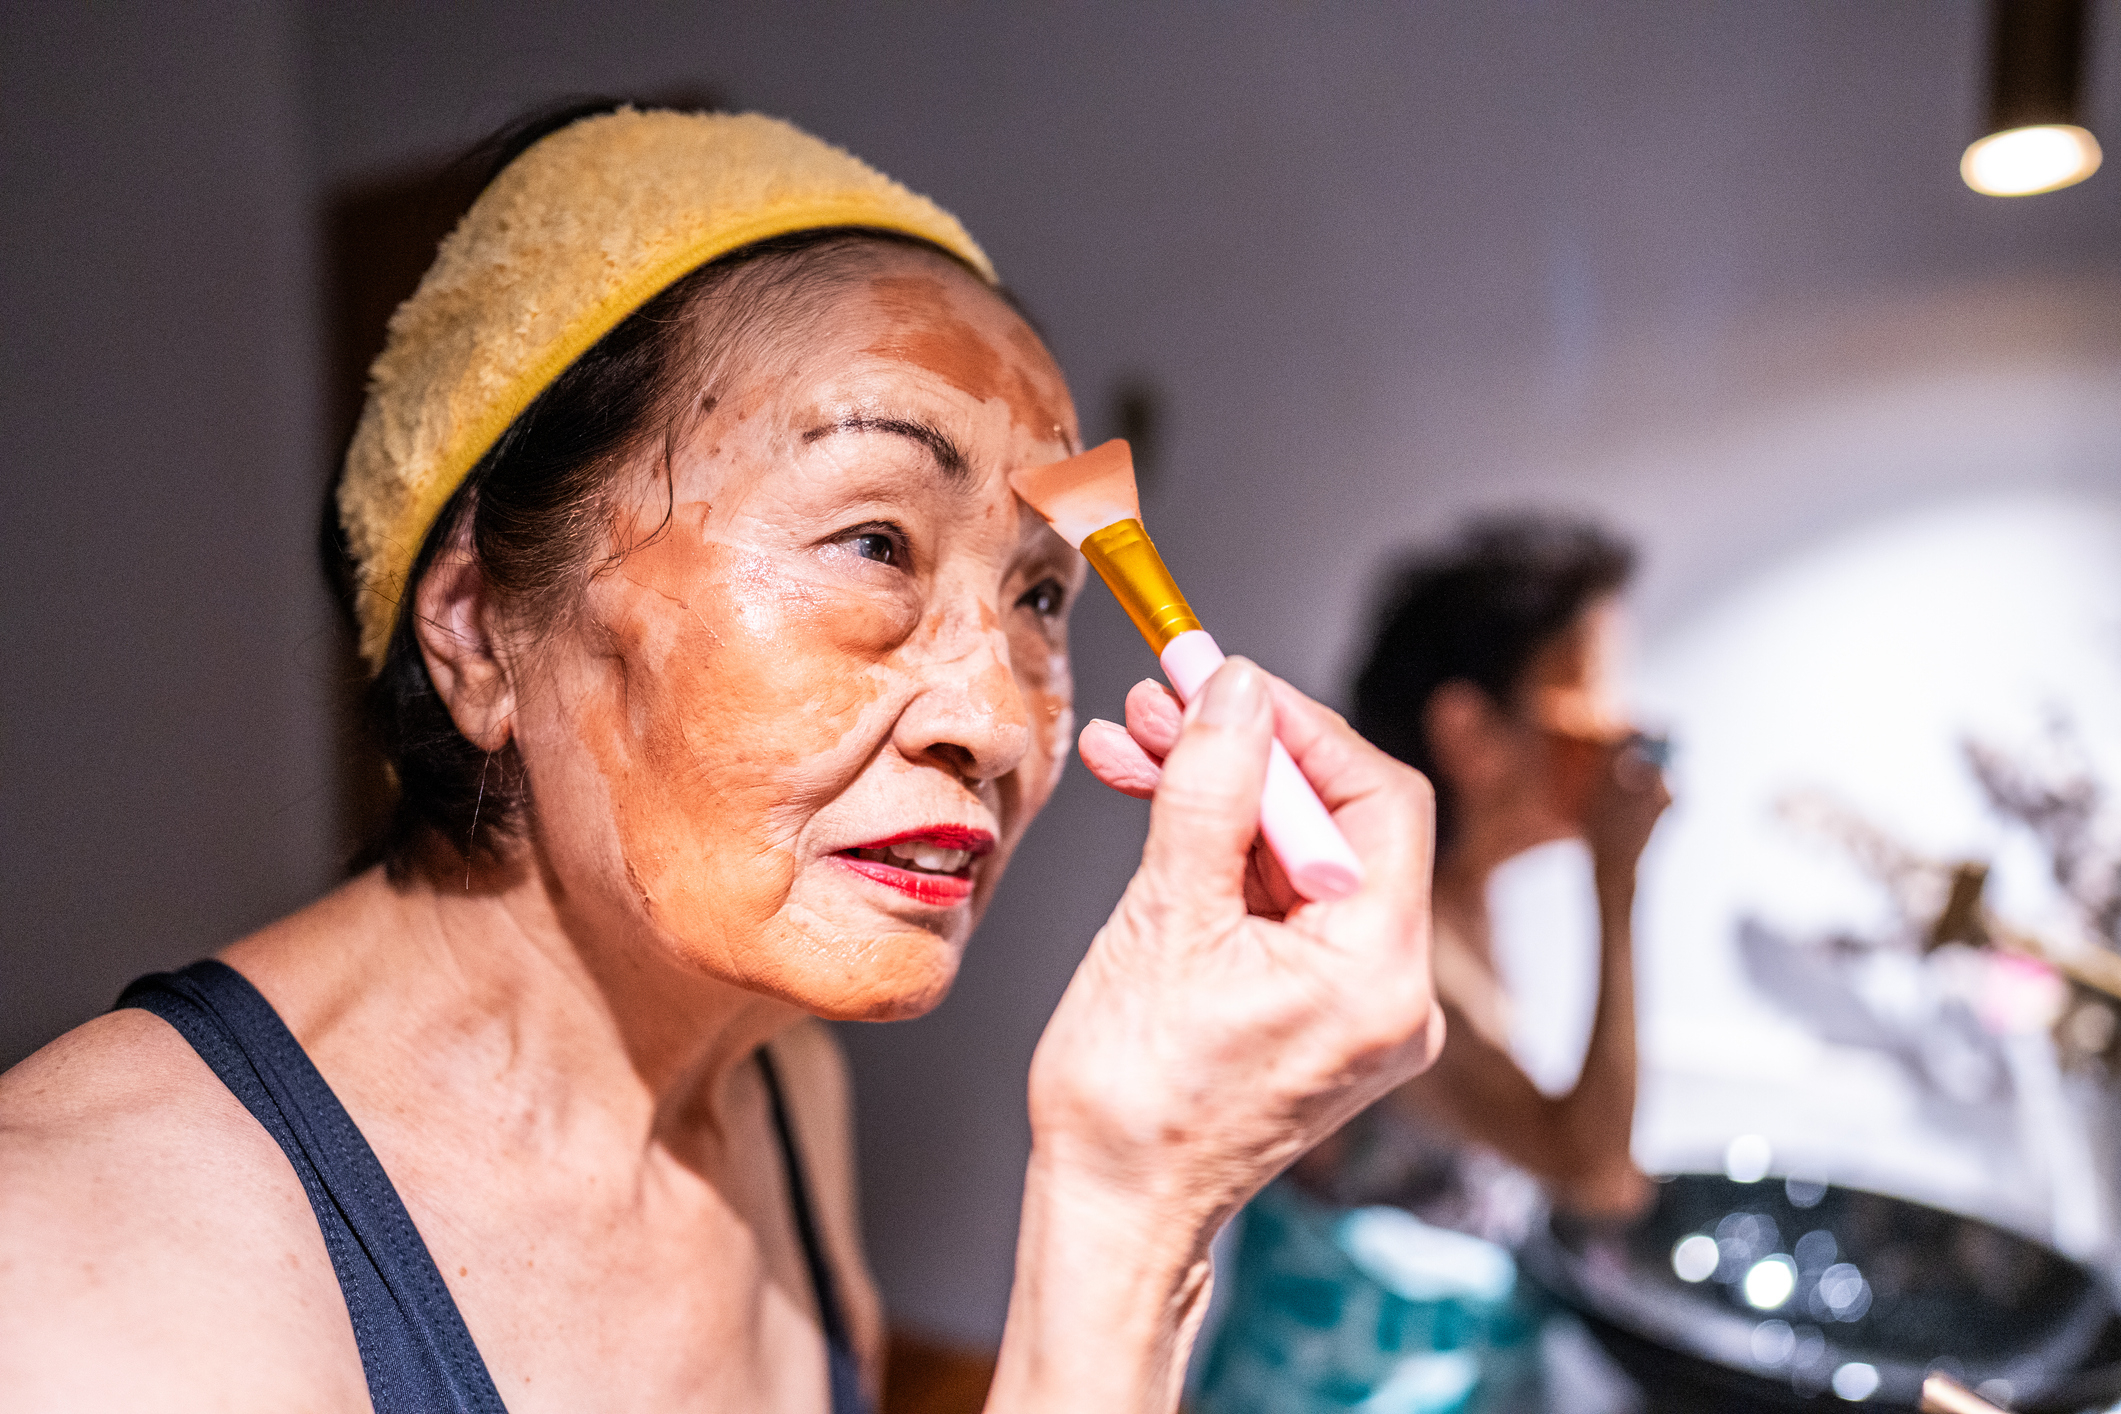 Older woman applying makeup with a brush, standing in front of a mirror